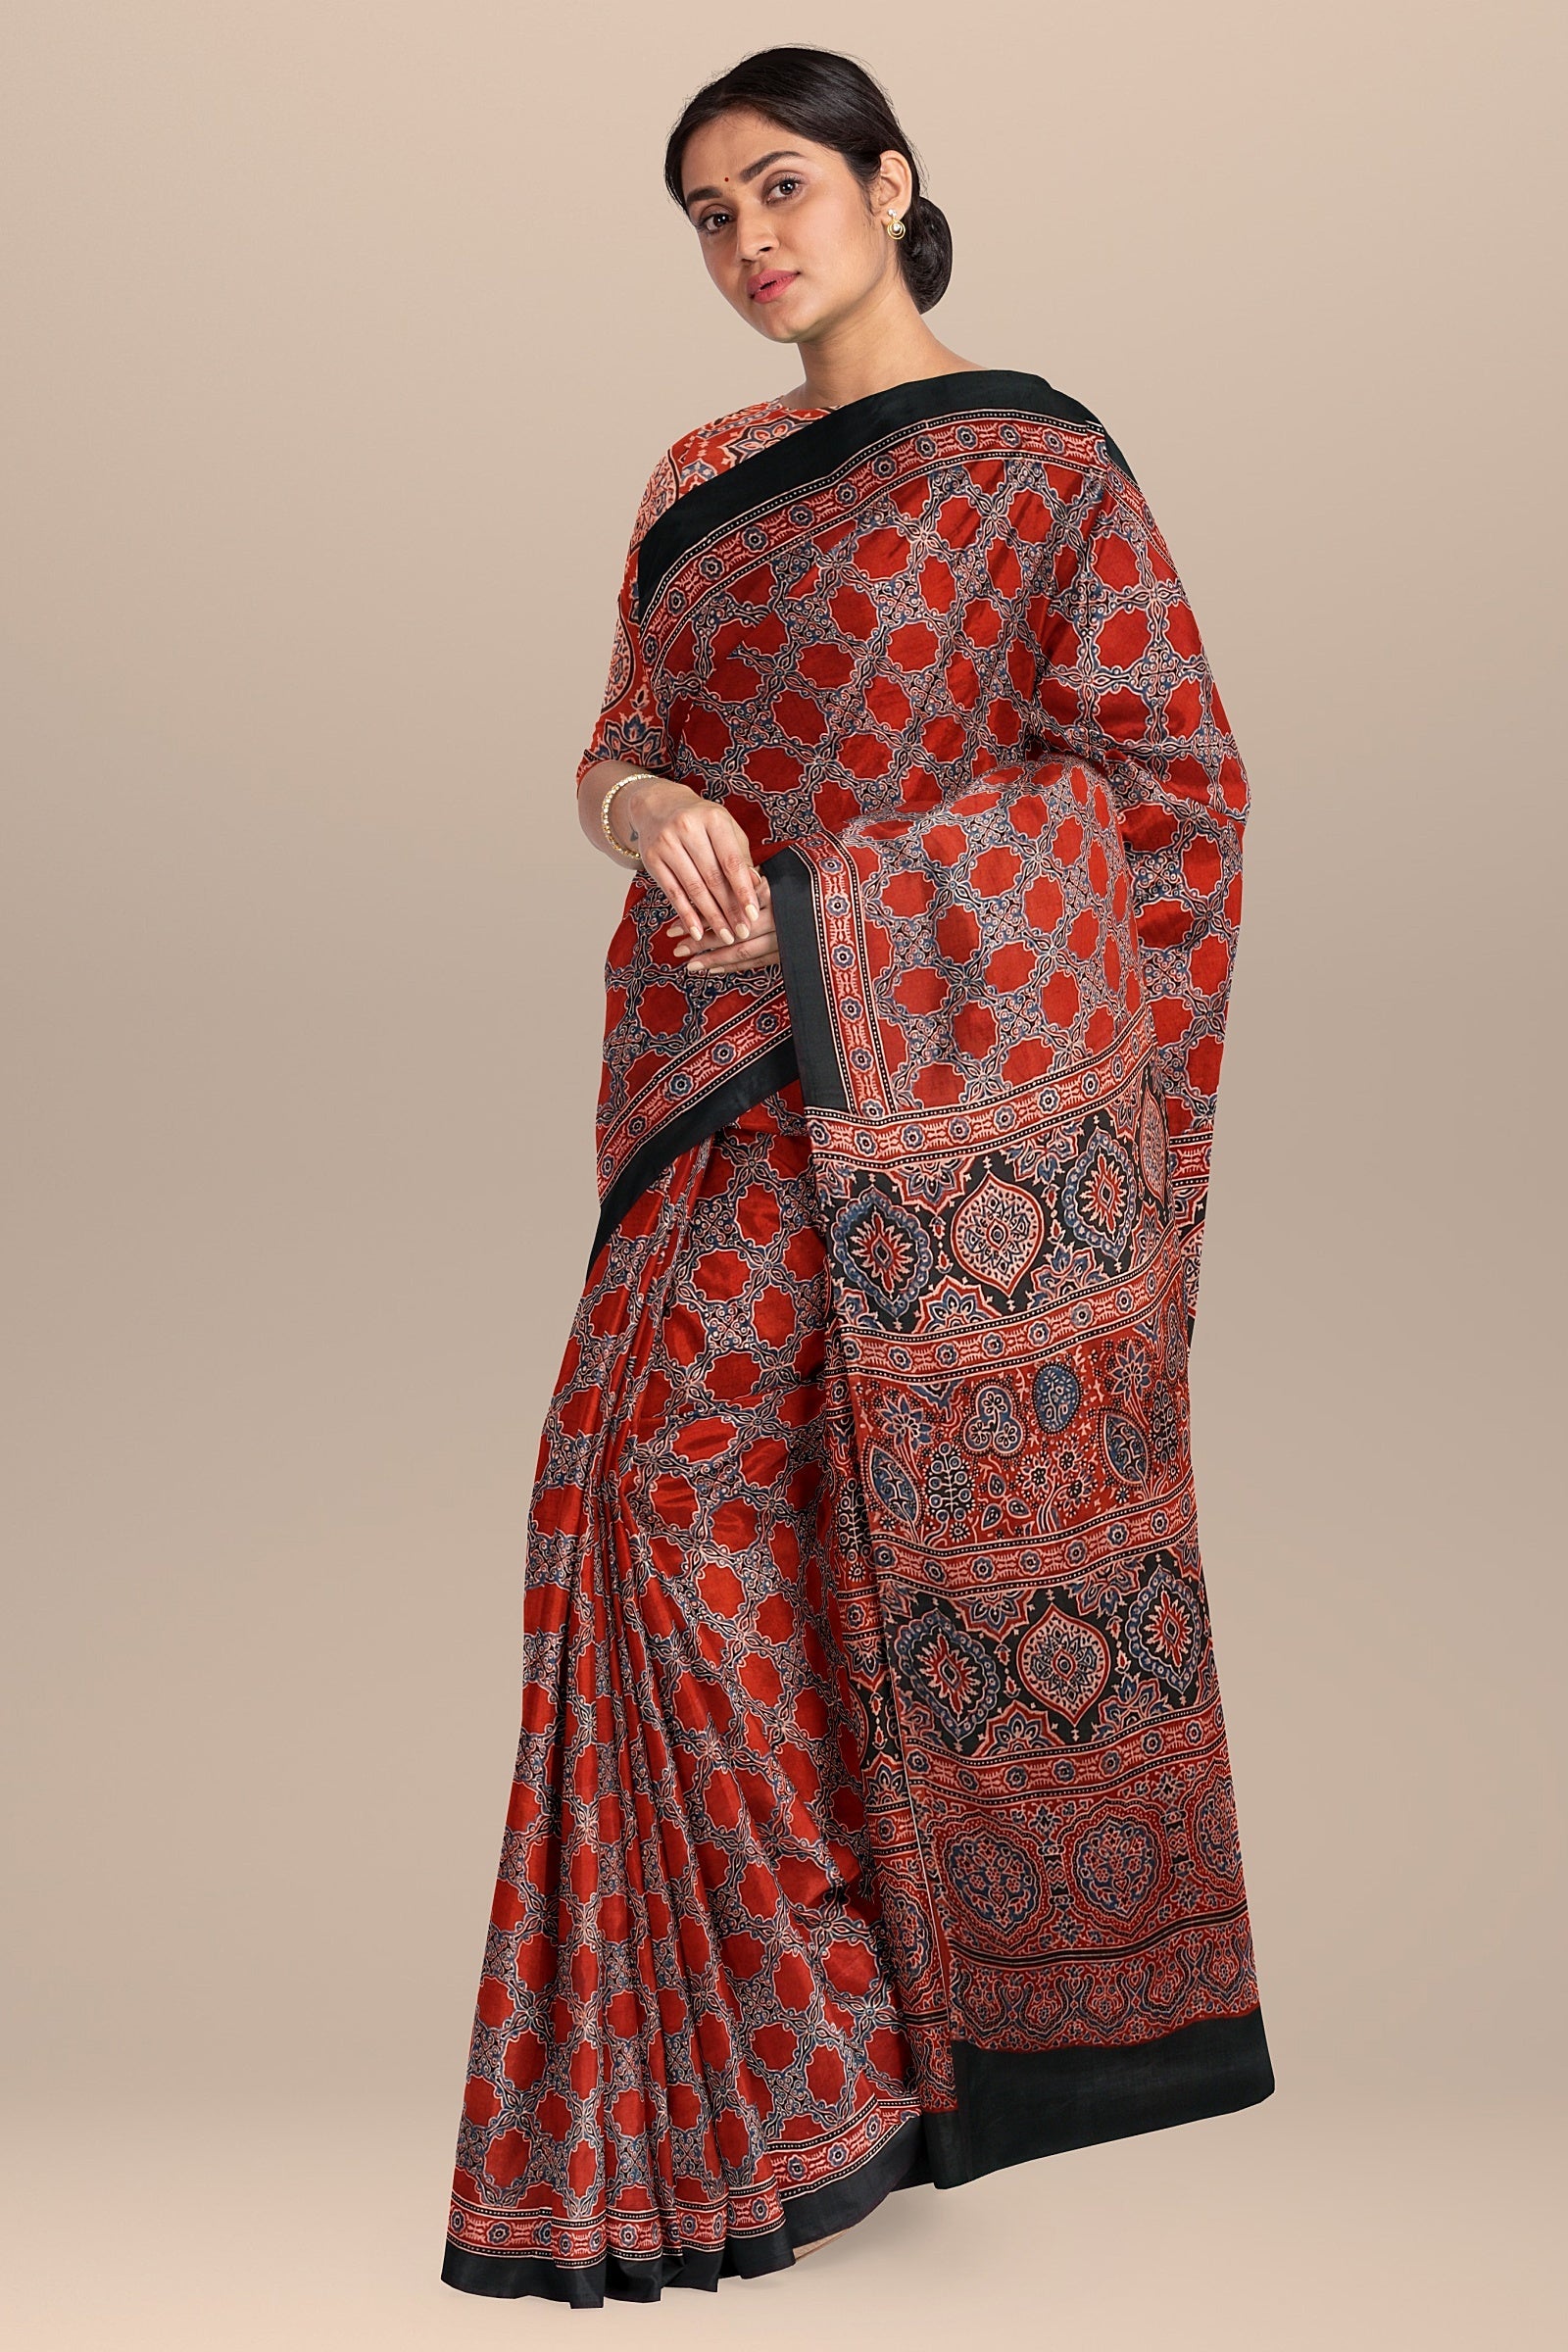 Traditional Ajrakh Print Modal Silk Saree with Black Blue and Red Floral and Geometrical Motifs  SKU-BS10073 - Bhartiya Shilp